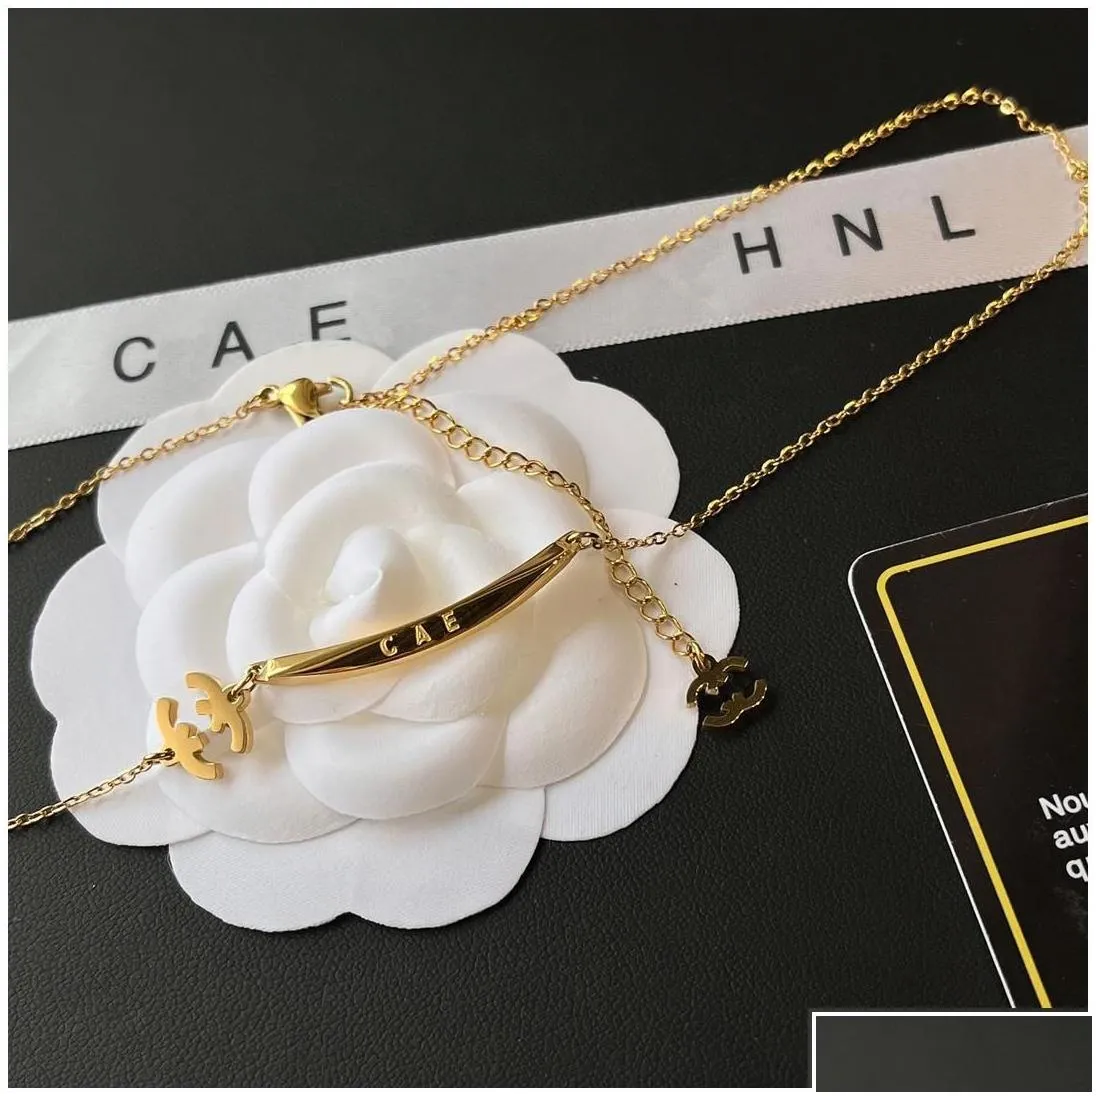 Pendant Necklaces Brand Elbow Letter Necklace Designed For Women Long Chain Gold Plated Designer Jewelry Exquisite Drop D Dh39C Deli Dhiwg